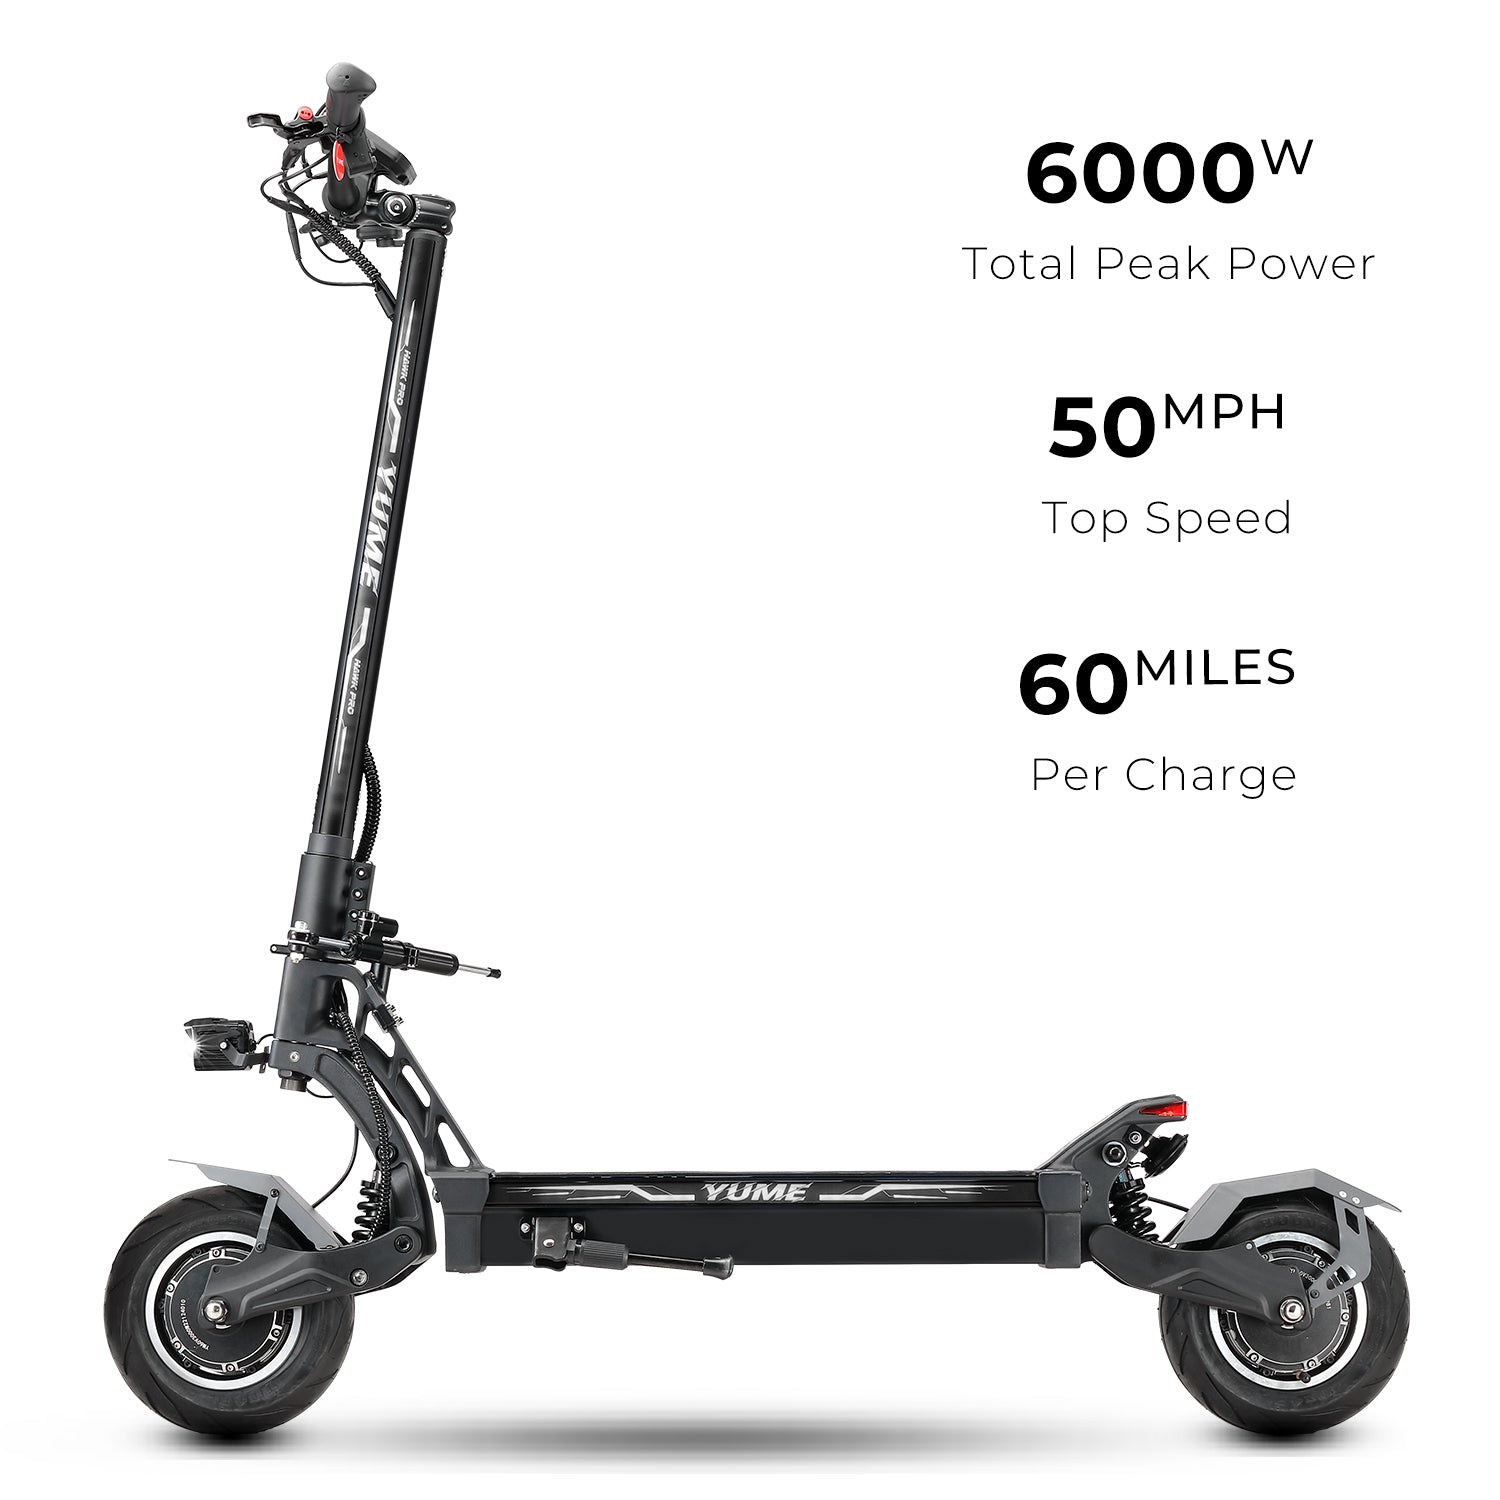 YUME Electric Scooter, High Speed&Powerful Motor, Safe & Happy 